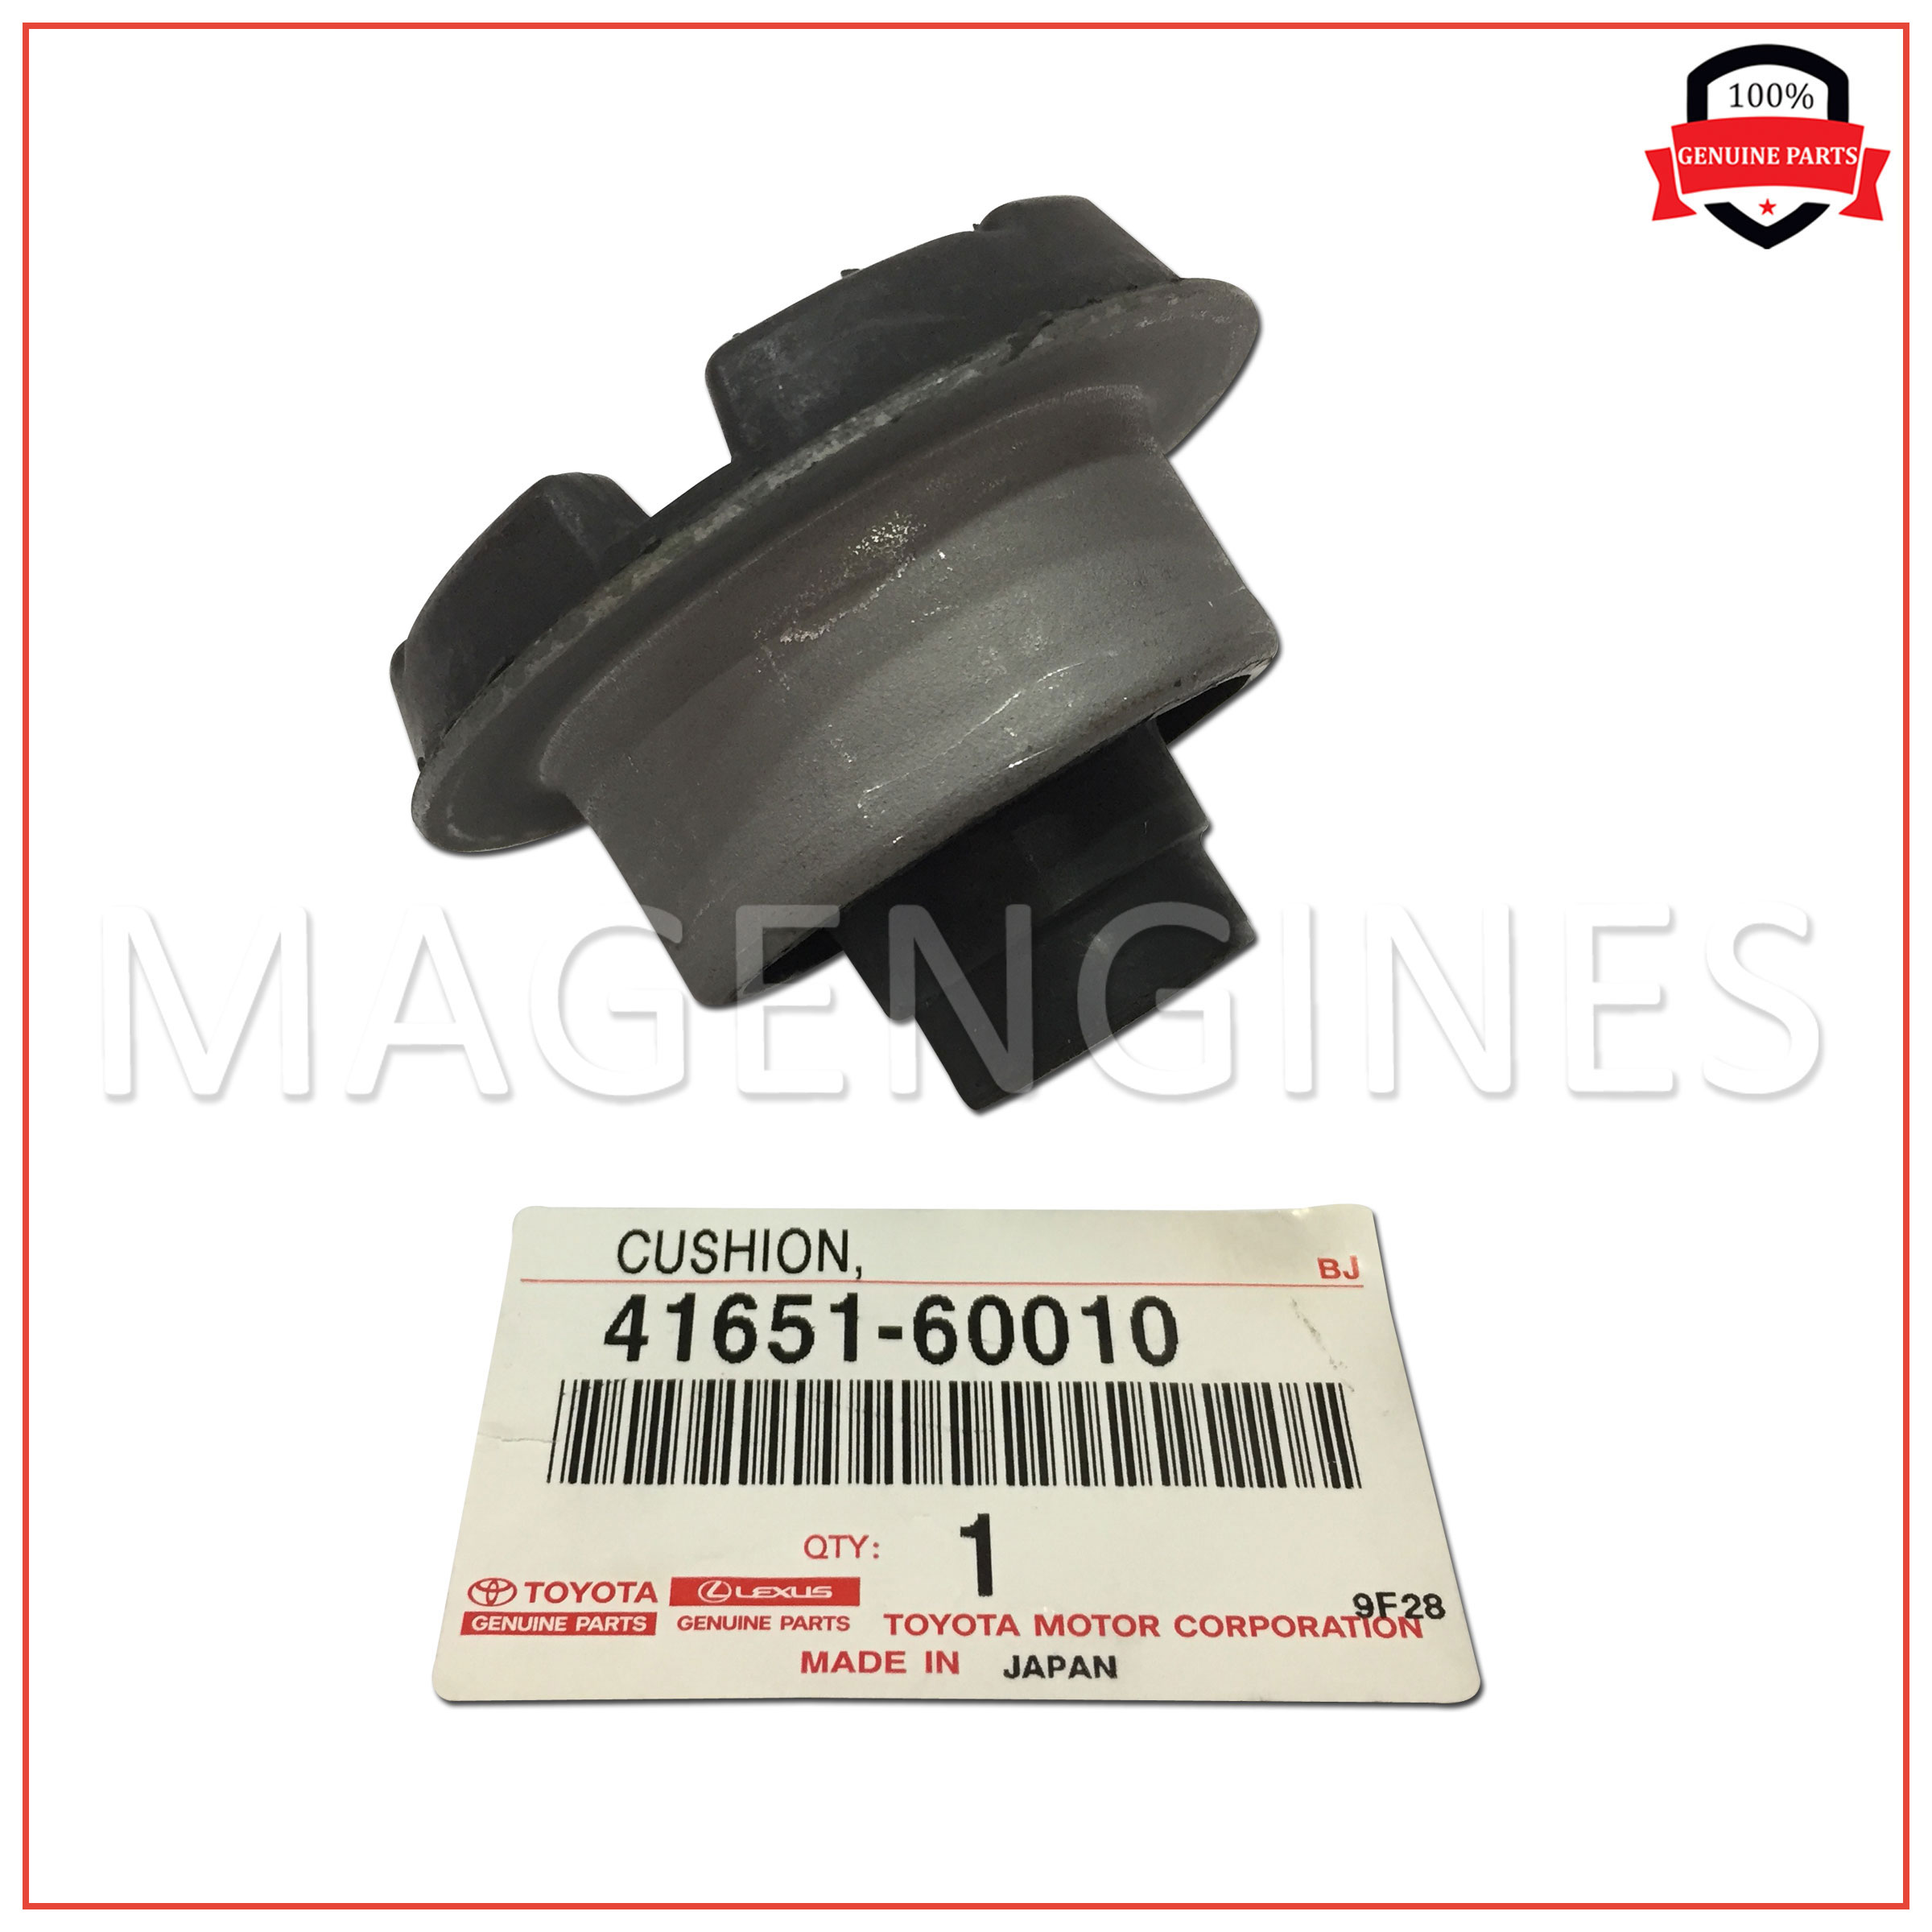 LOWER 41654-60010 OEM 4165460010 GENUINE Toyota STOPPER DIFFERENTIAL MOUNT